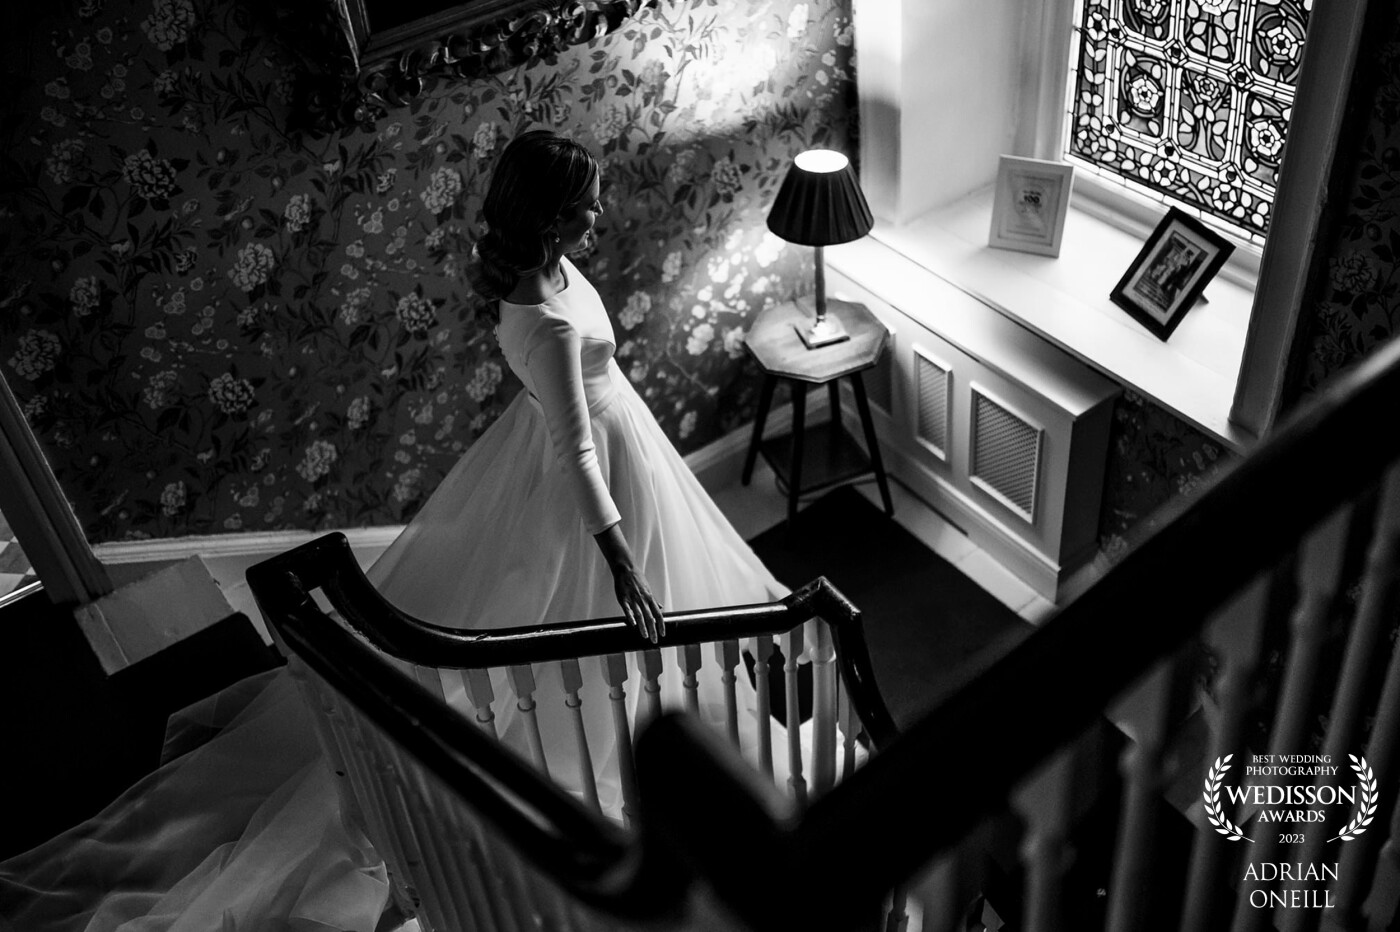 The bride on her way down the stairs to the ceremony...I love her beautiful smile and I wanted to capture this with her knowing. I just love these real moments